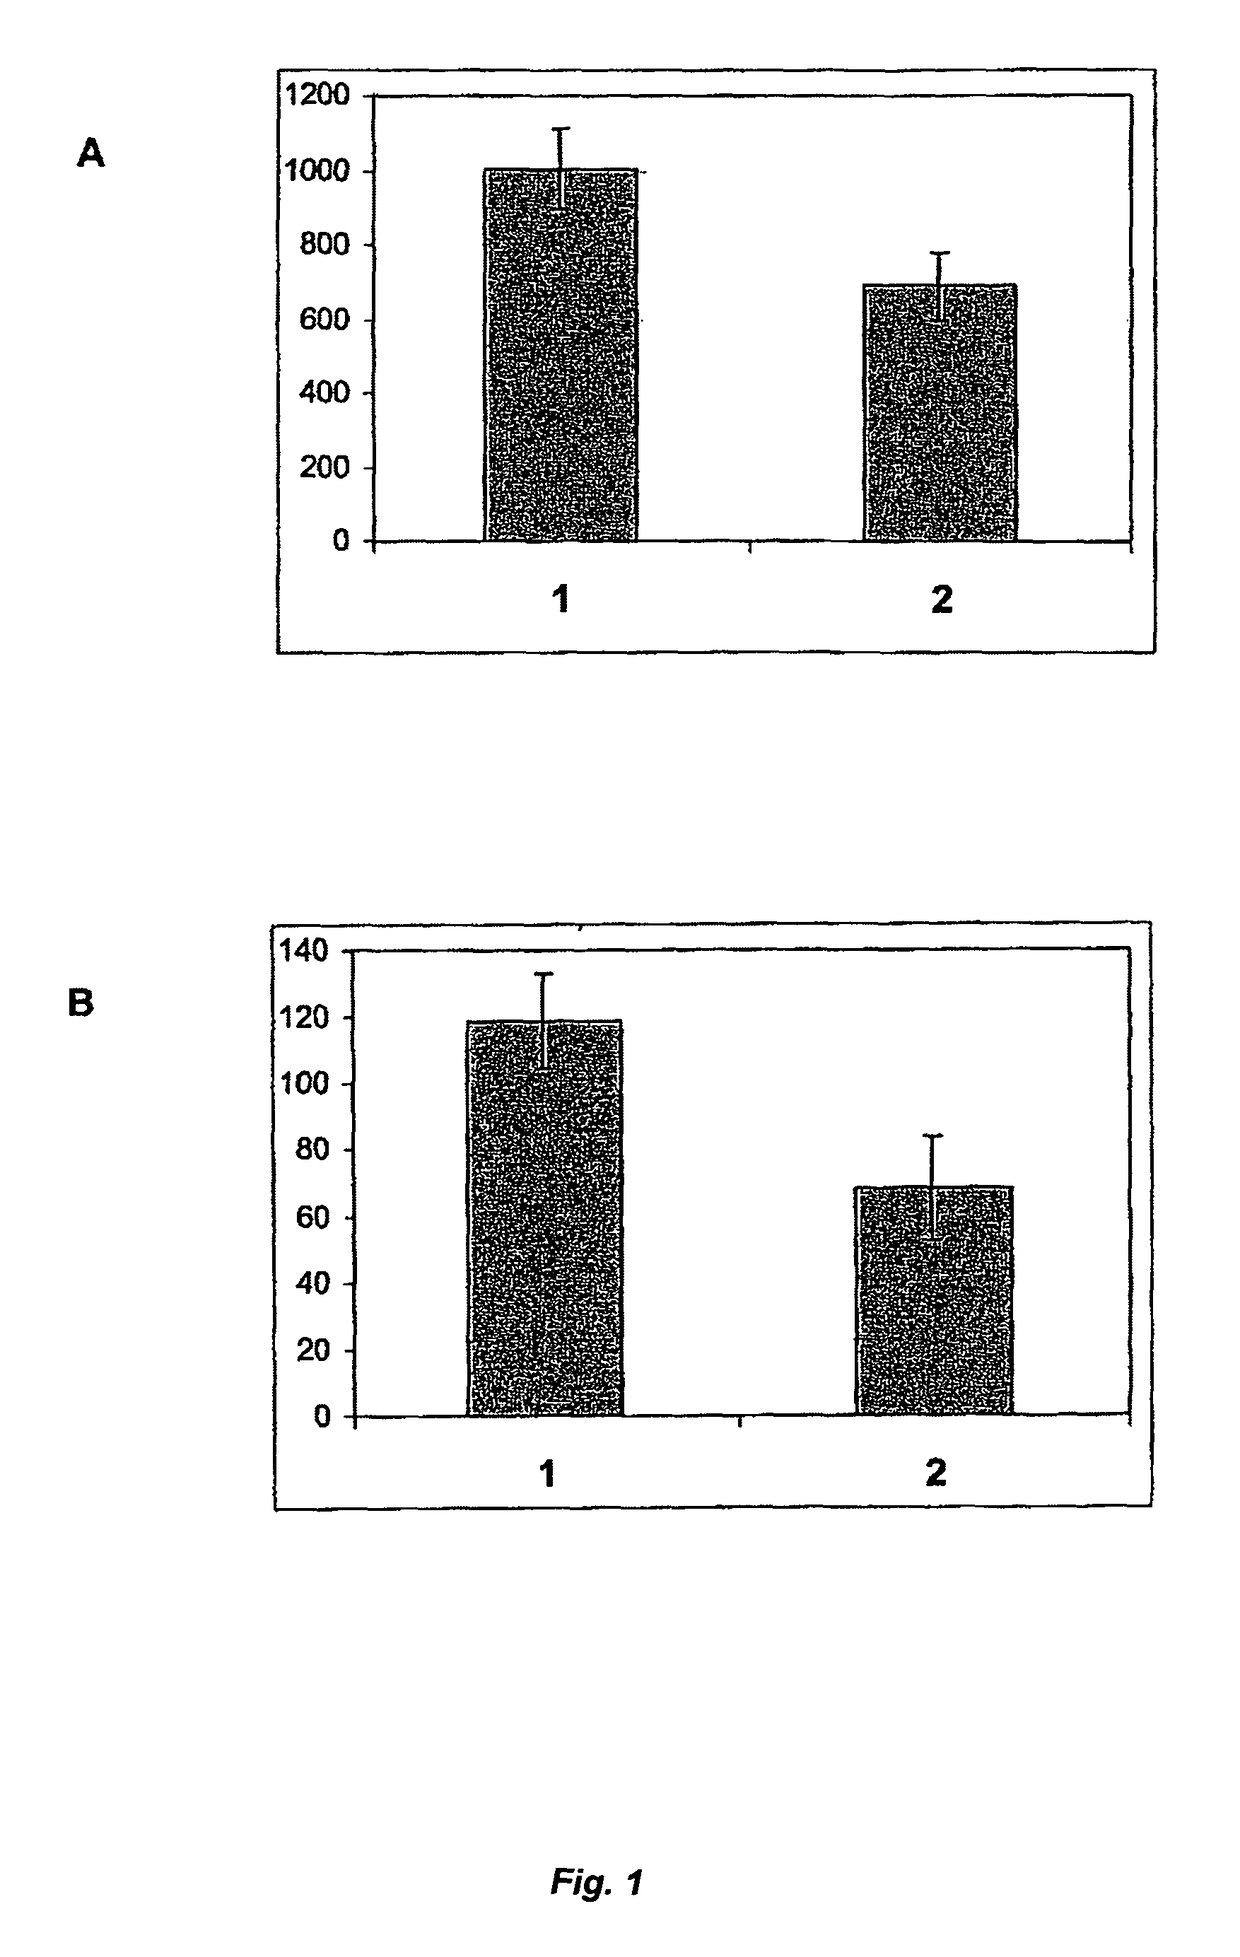 Nucleic acids encoding vitamin K expoxide reductase subunit 1 and vitamin K dependent protein expression and methods of using same